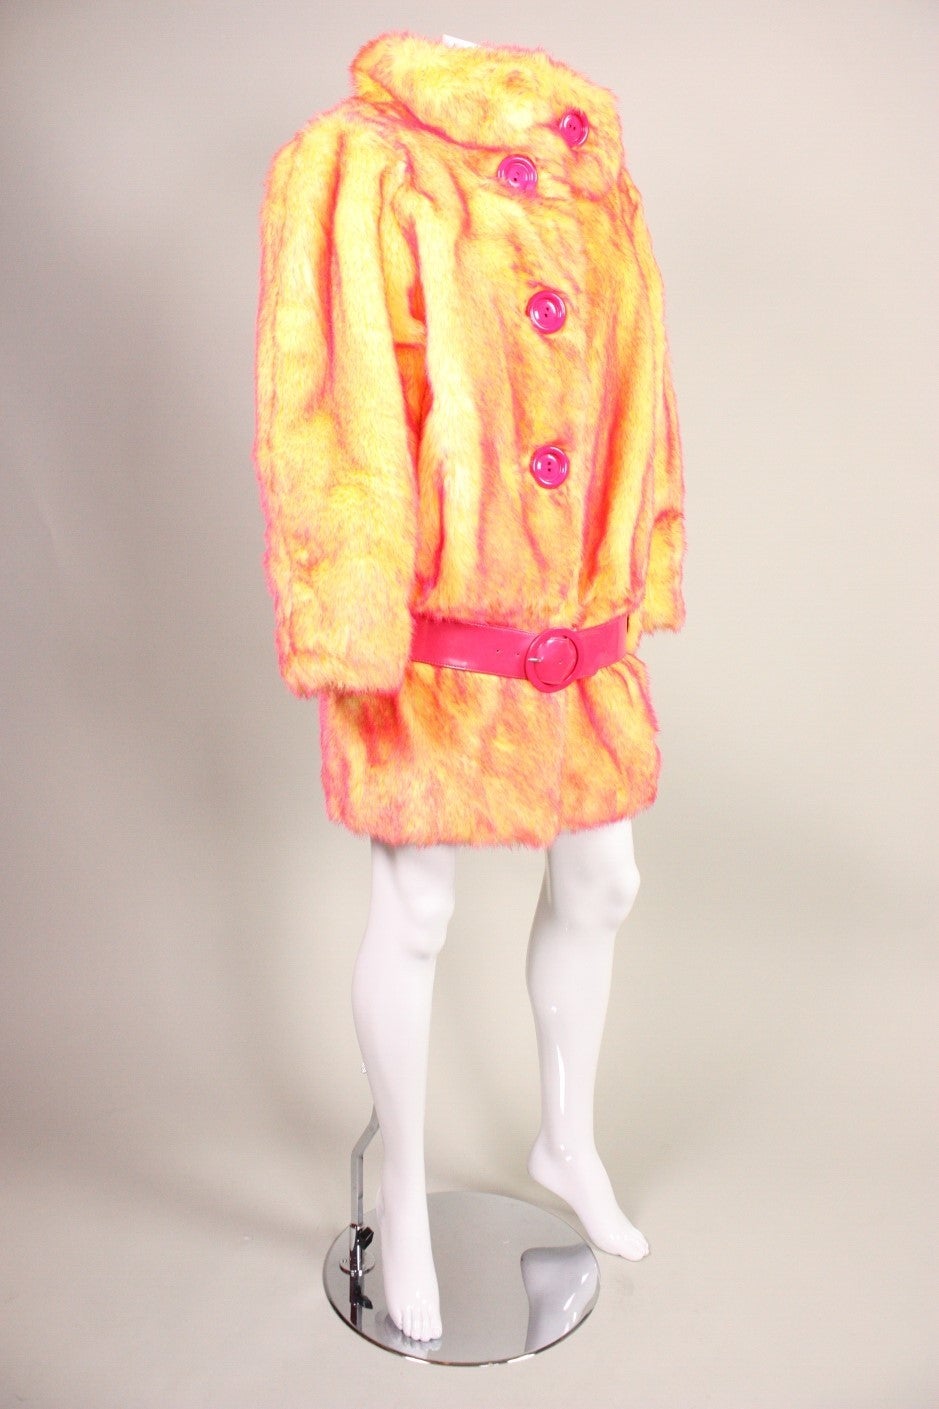 Thierry Mugler statement coat likely dates to the early 1990's.  It is made of pink and yellow faux fur with large plastic pink buttons.  Vinyl belt at hips.  Fully lined.

Labeled size 40.

Measurements-
Bust: 48